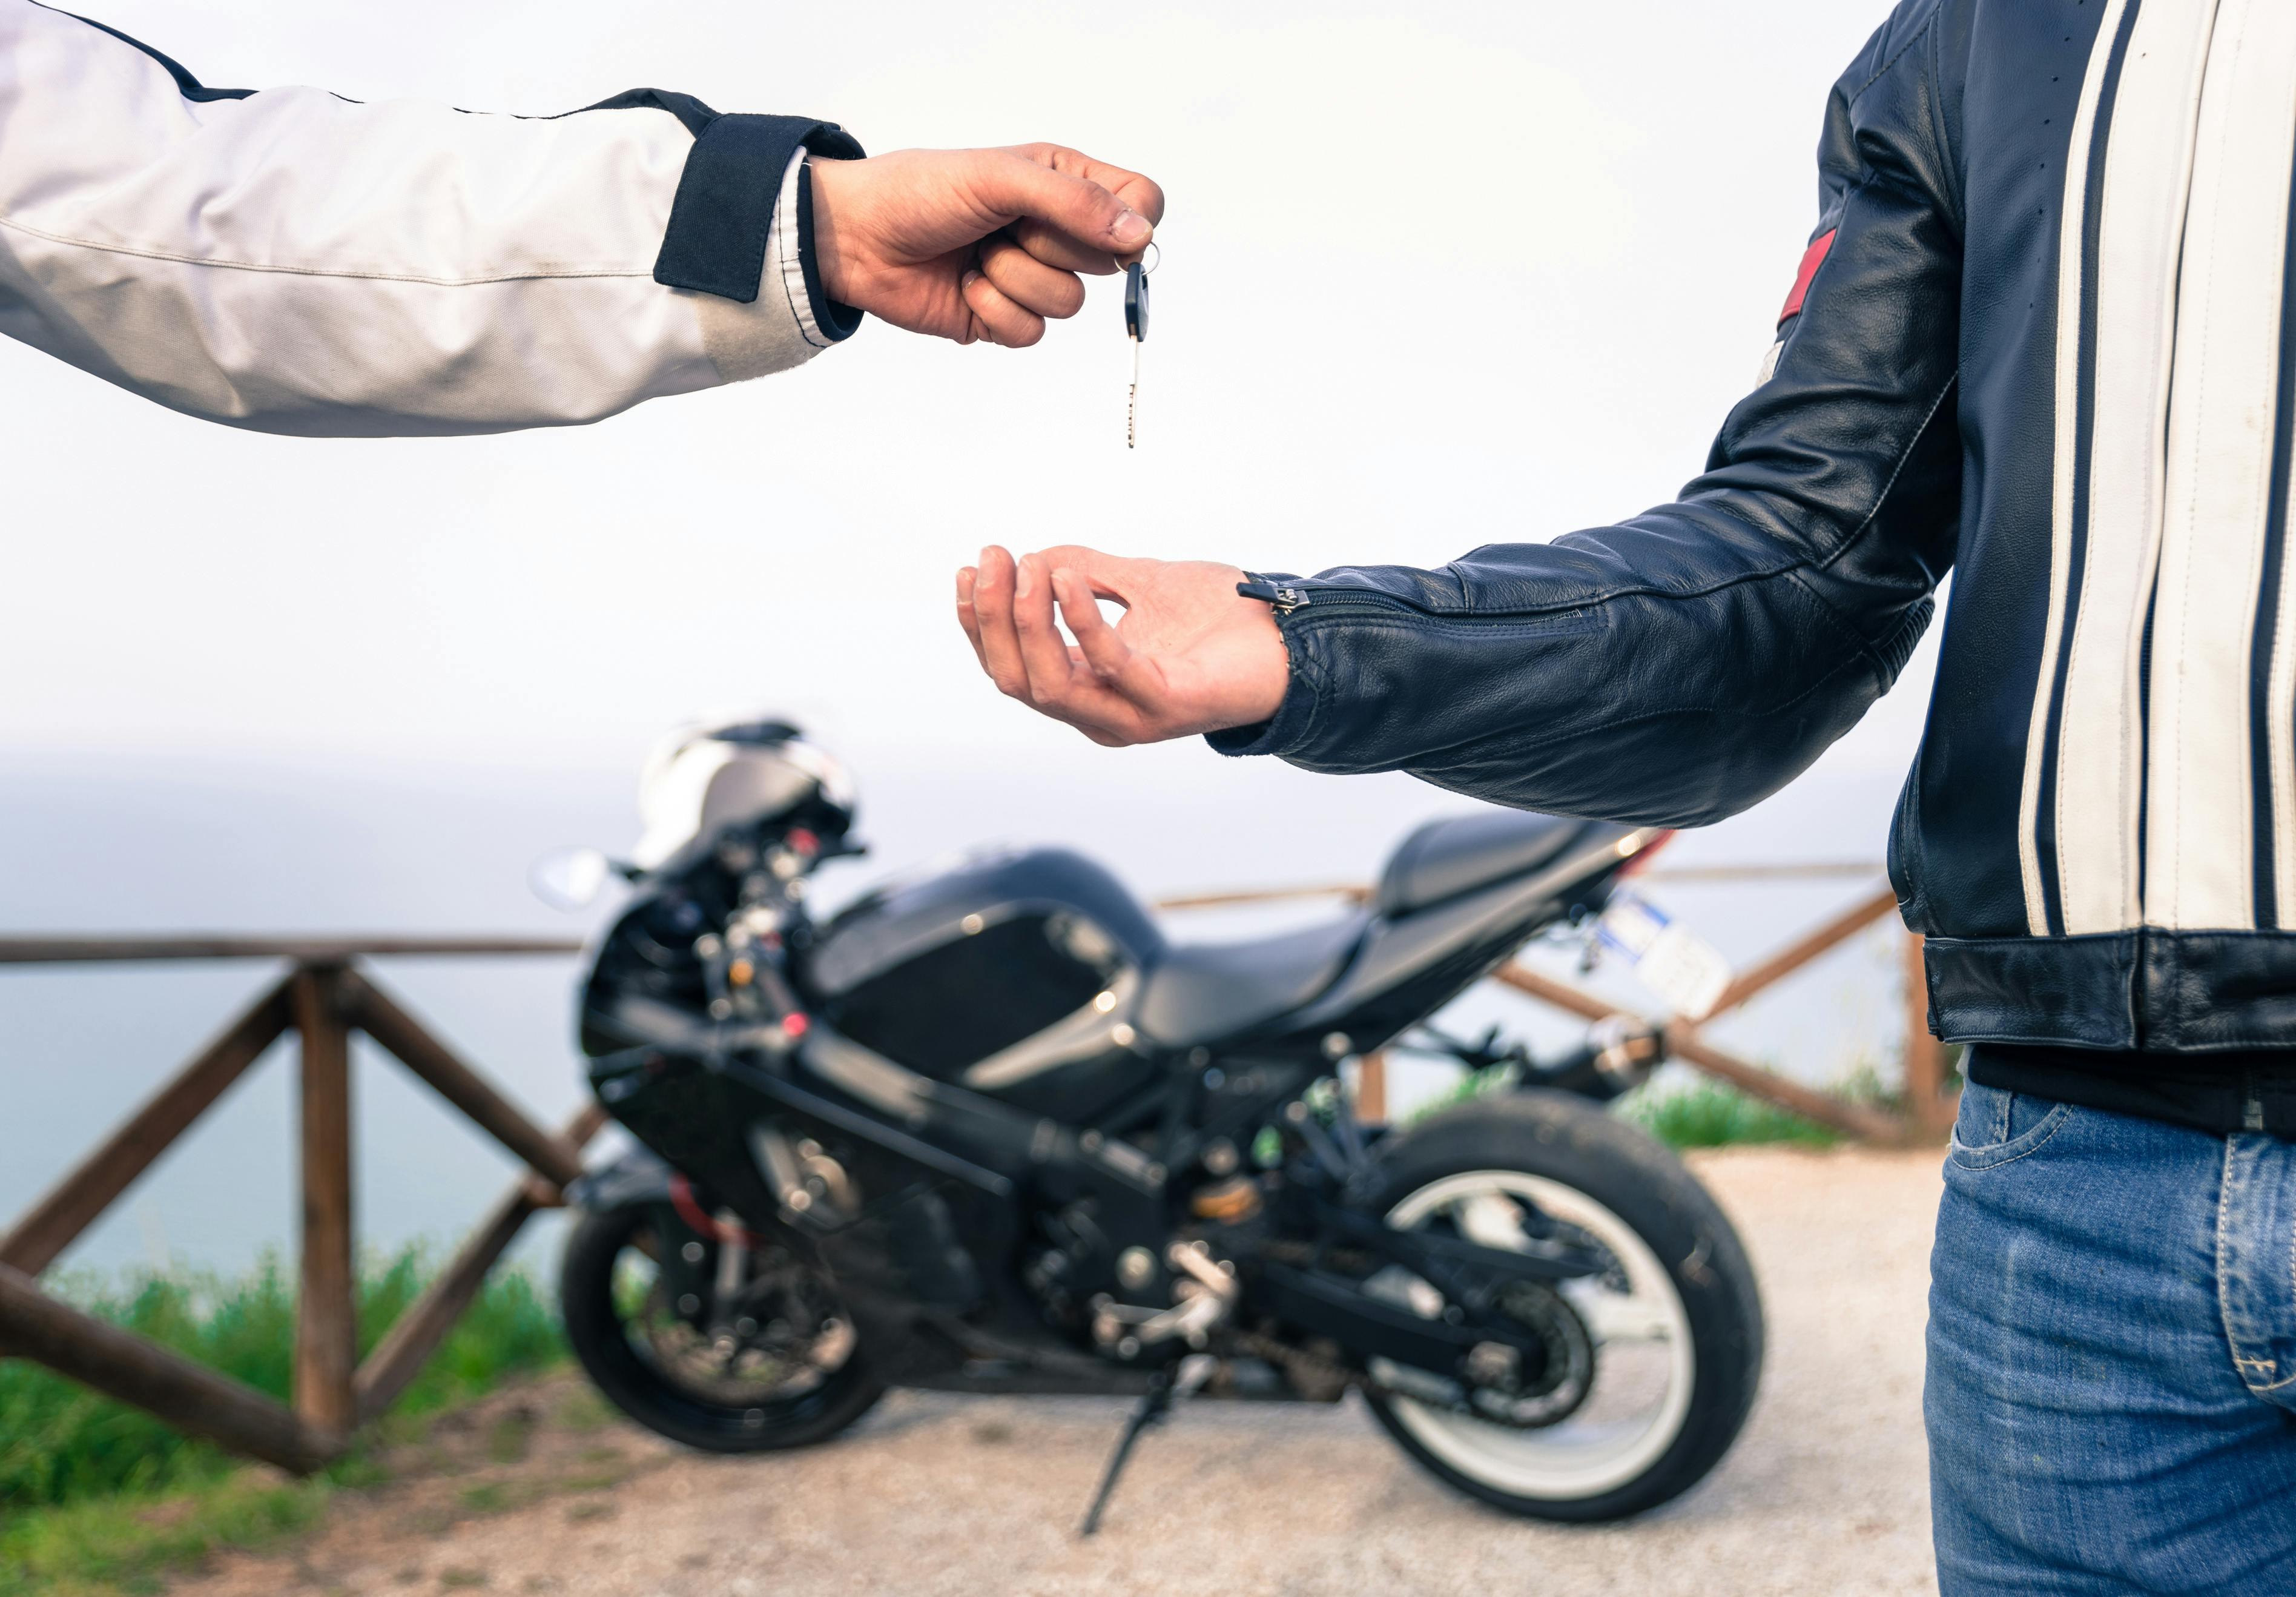 owner decides to rent motorcycle on Riders Share and exchanges keys with the rider